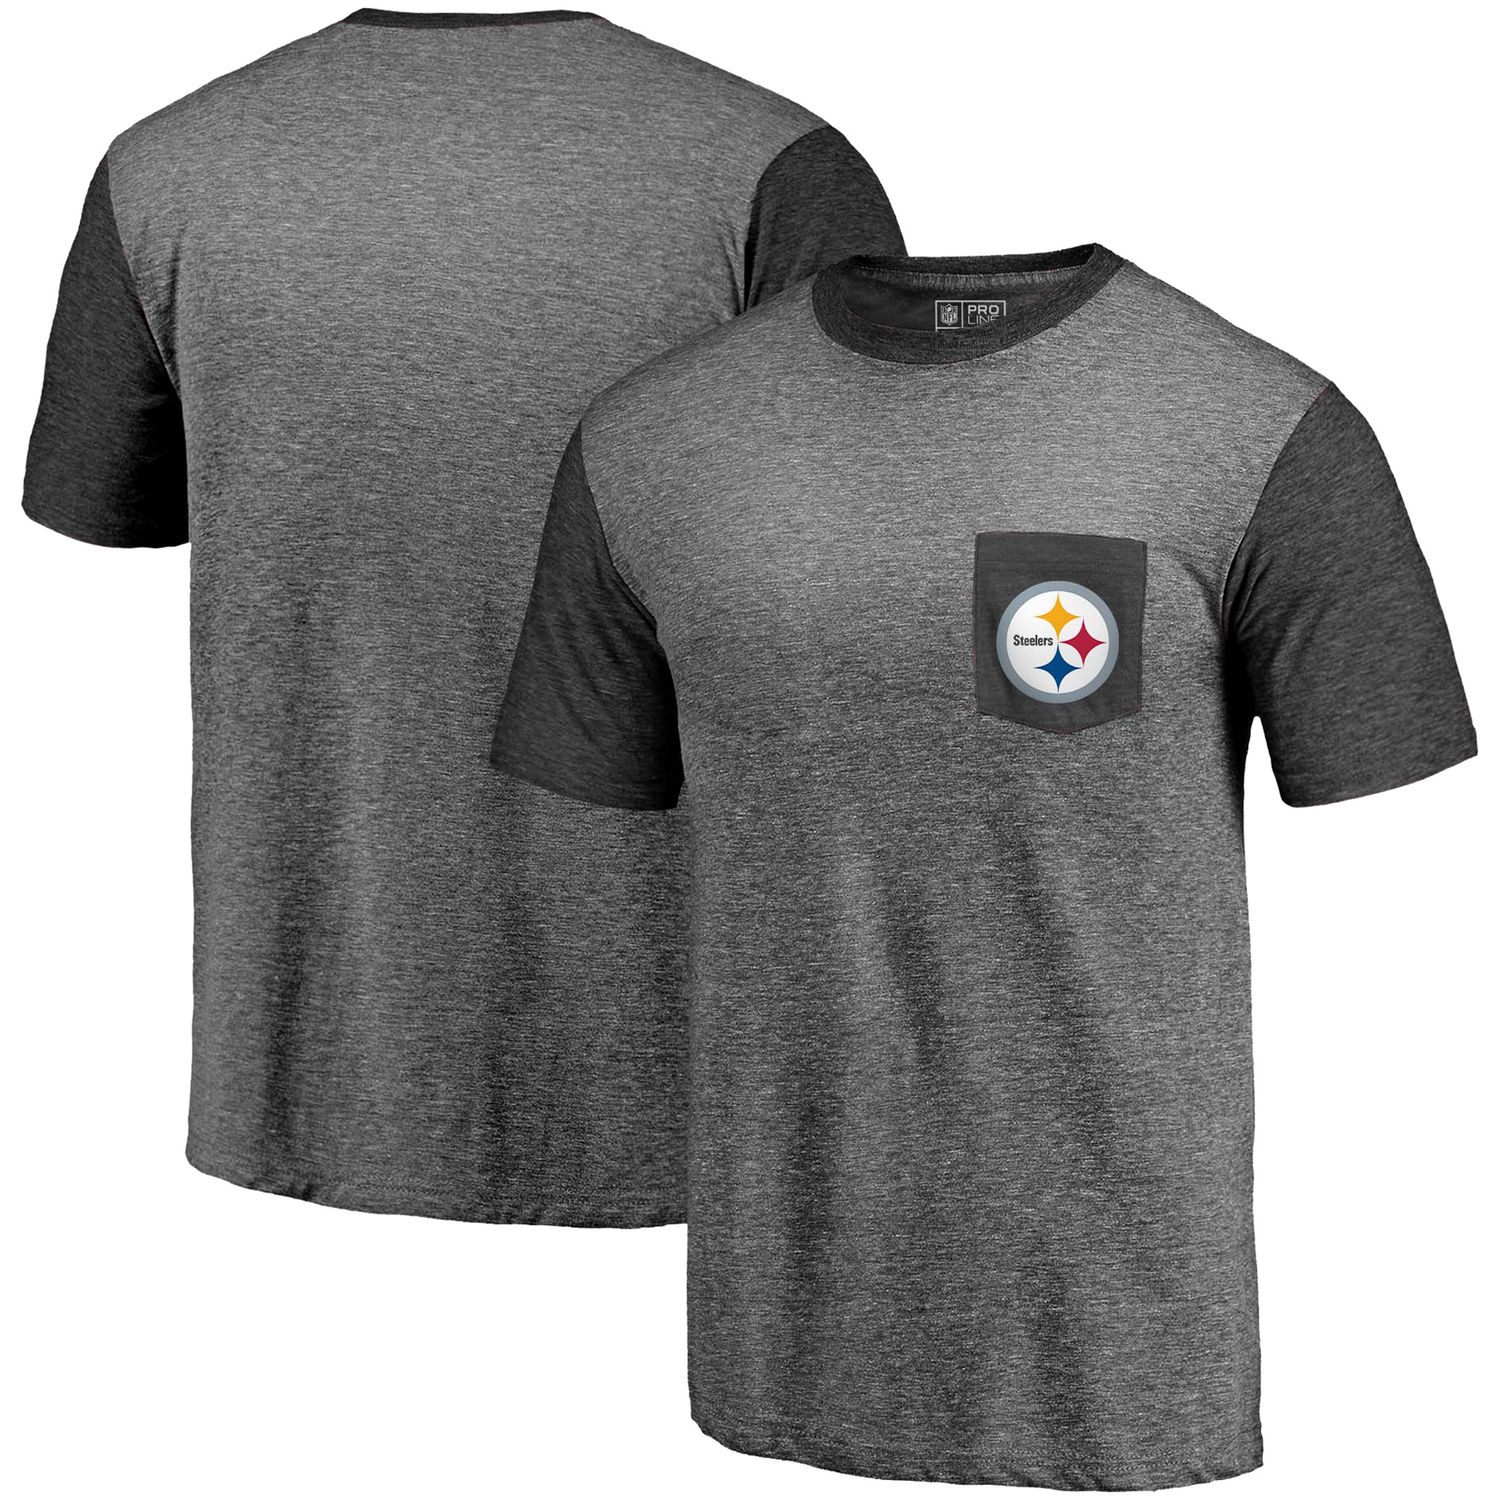 Men's Pittsburgh Steelers Pro Line by Fanatics Branded Heathered Gray-Black Refresh Pocket T-Shirt